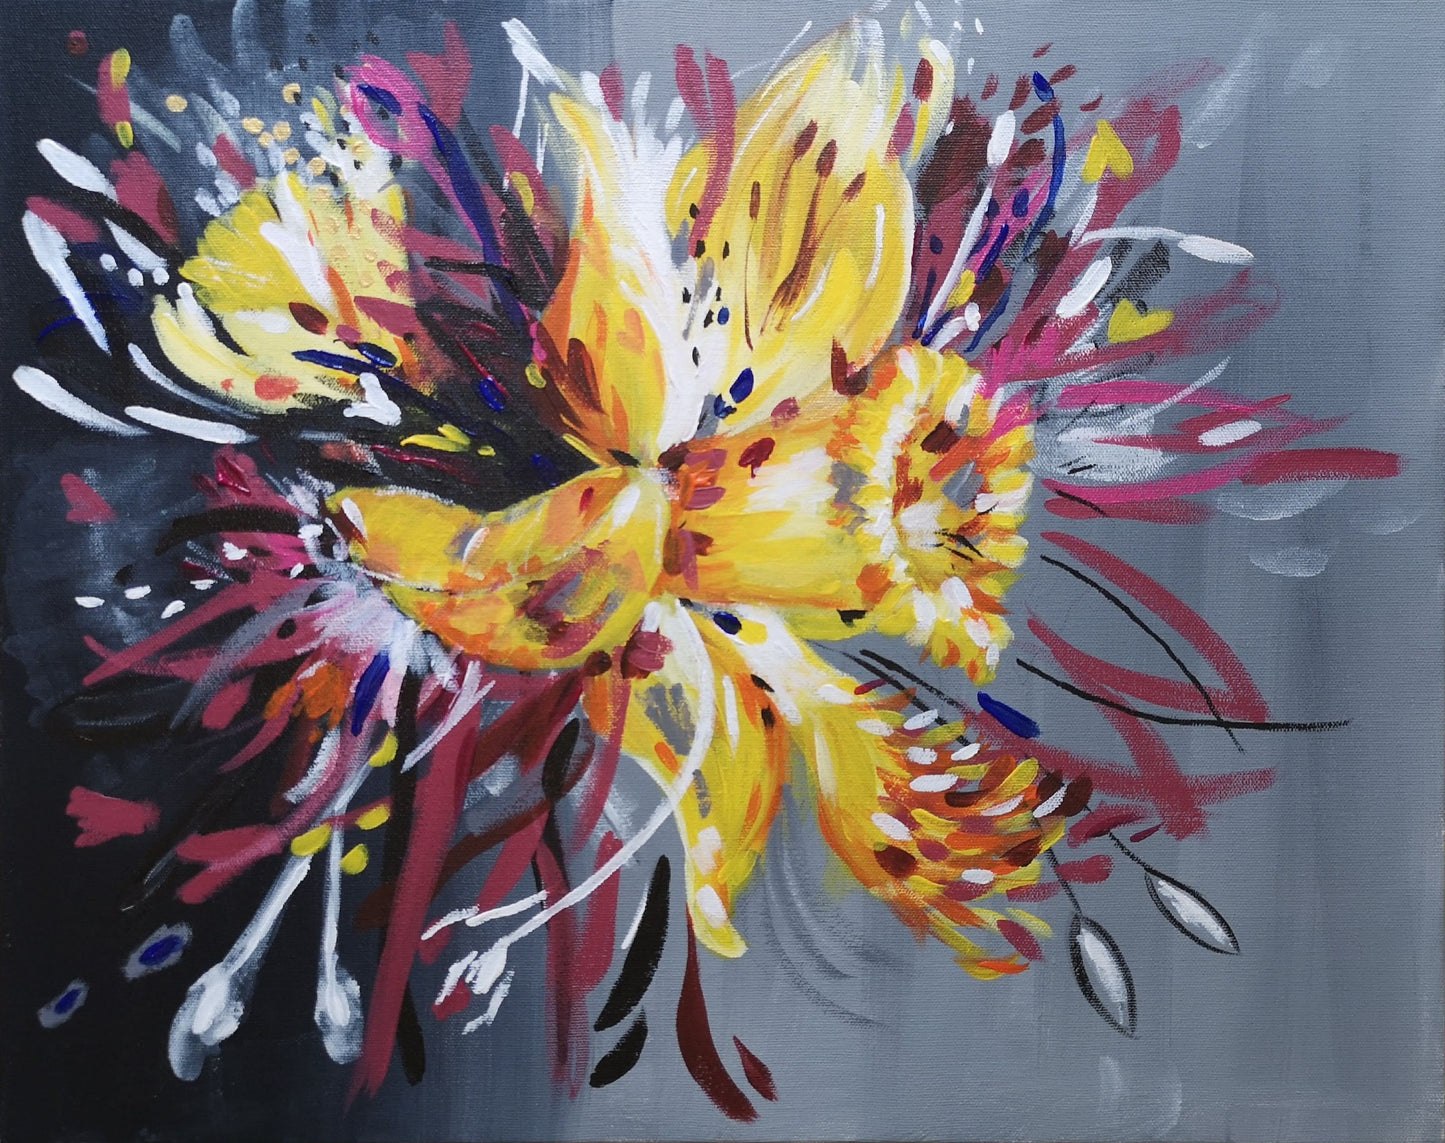 Daffodil, Flower painting, acrylic canvas artwork, abstract floral, yellow, pink, maroon, blue, black, grey, judy century art, canvas, original painting, interior design, spring blooms